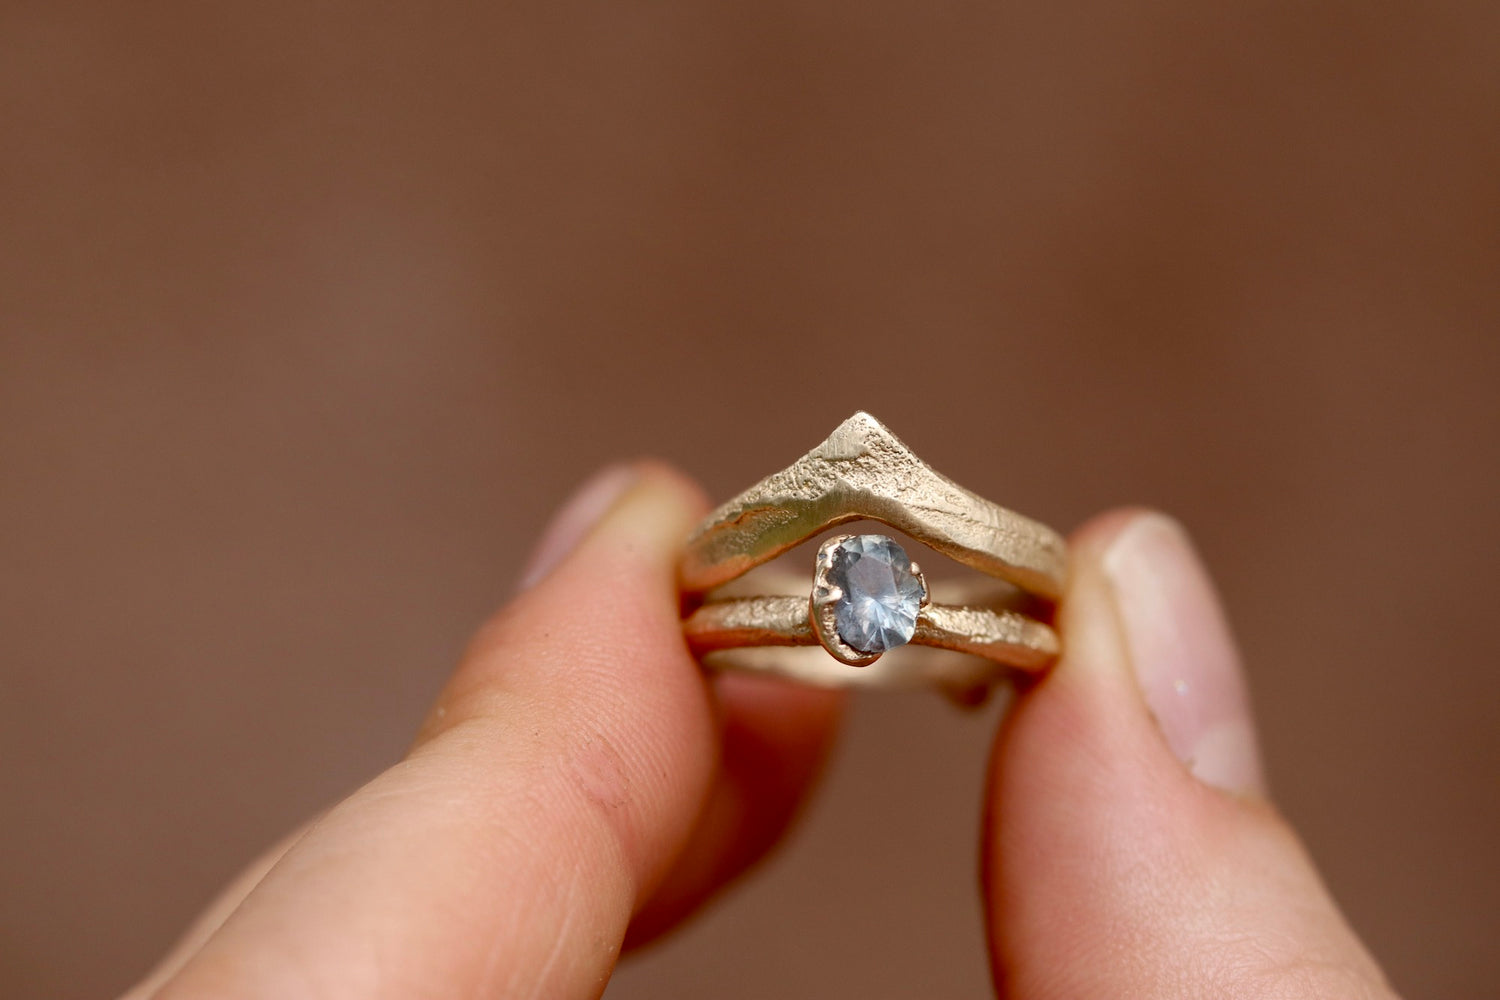 rustic organic sandcast solitaire ring alternative engagement 14kt recycled gold montana sapphire the arrowleaf